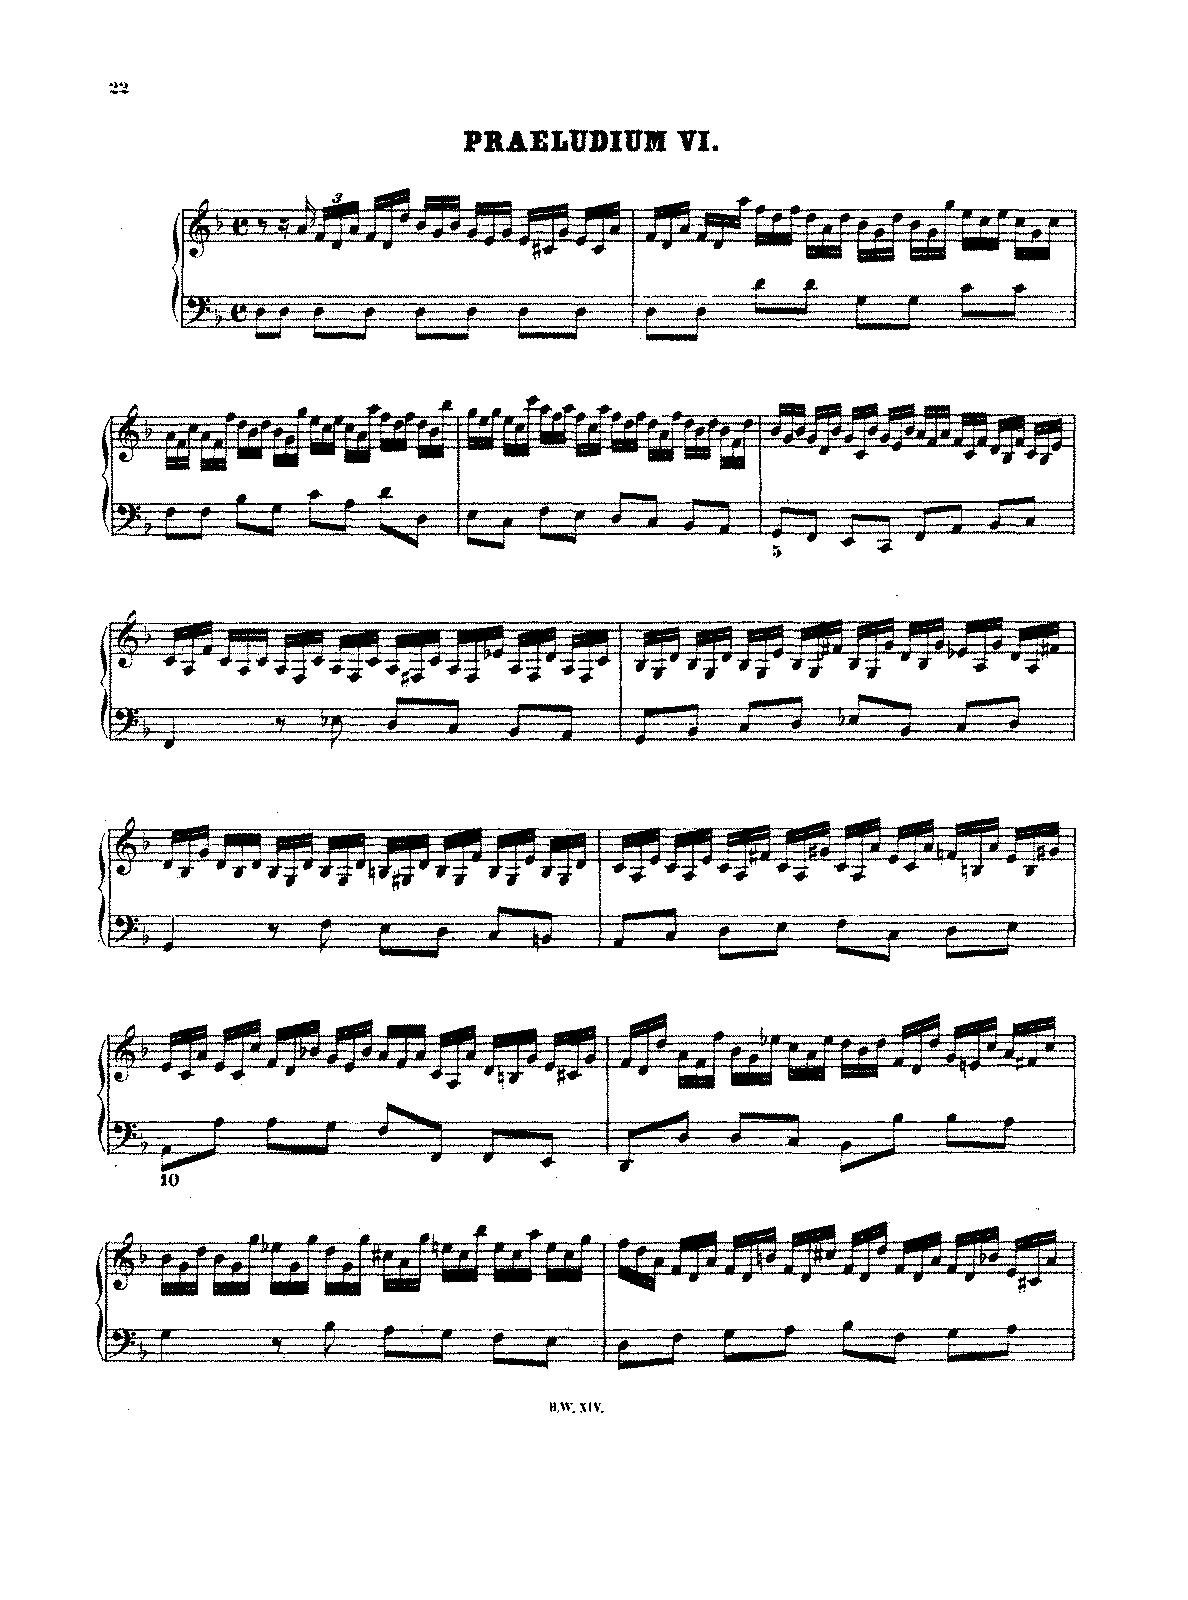 prelude and fugue no. 22 in b-flat minor